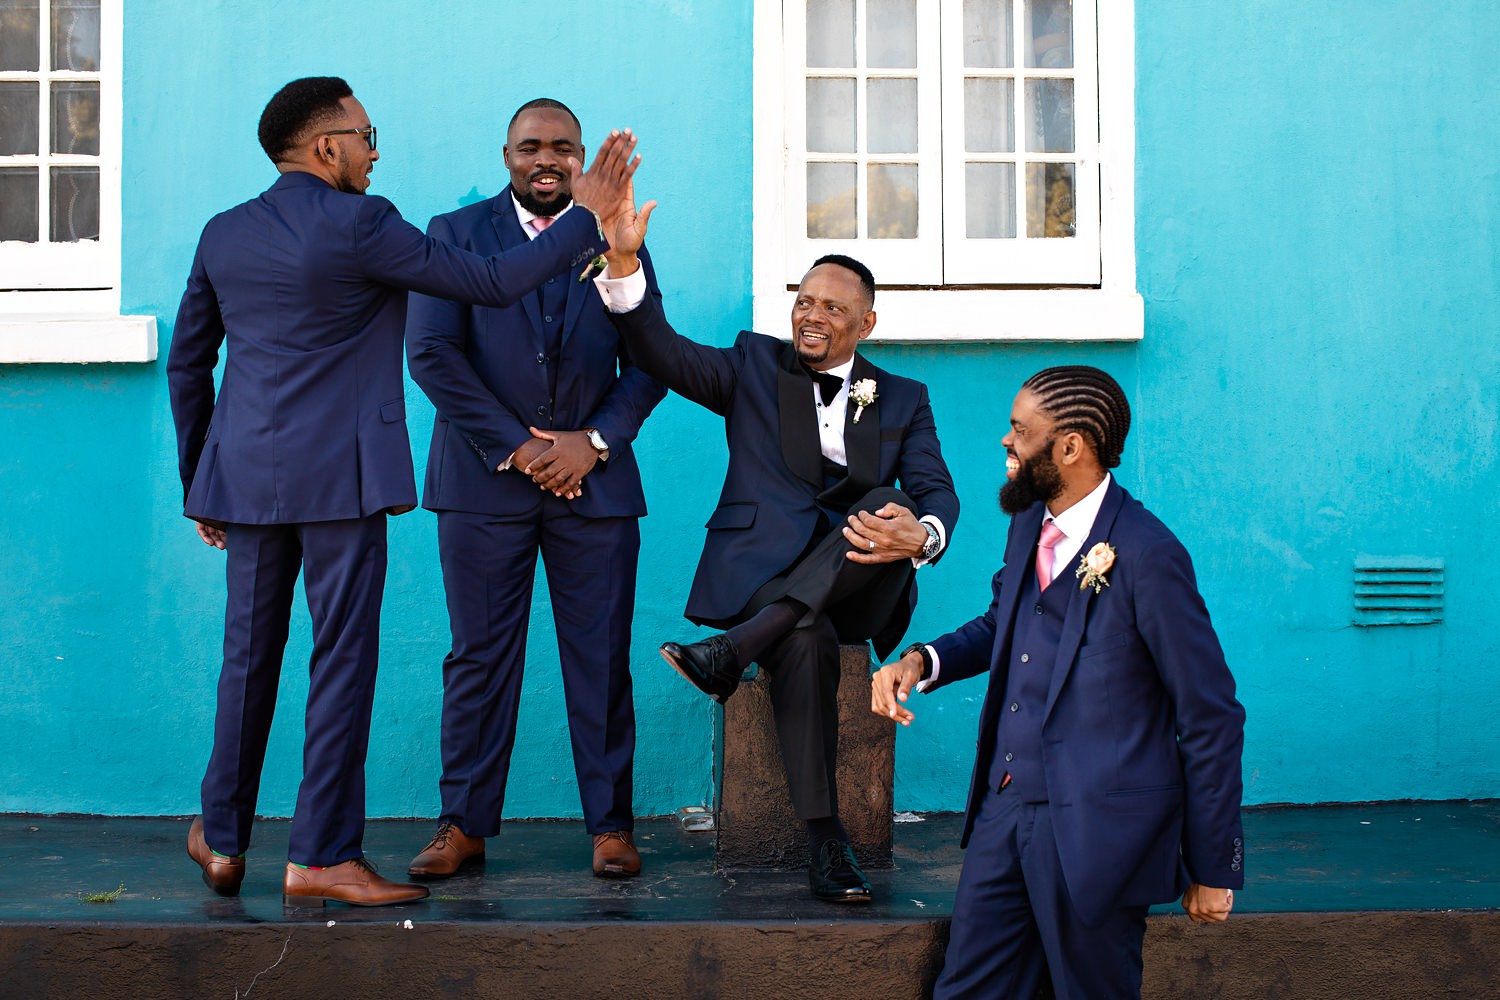 The groom high fives his groomsman in front of a turquoise wall during their bridal party photos by wedding photographer in South Africa, Niki M Photography